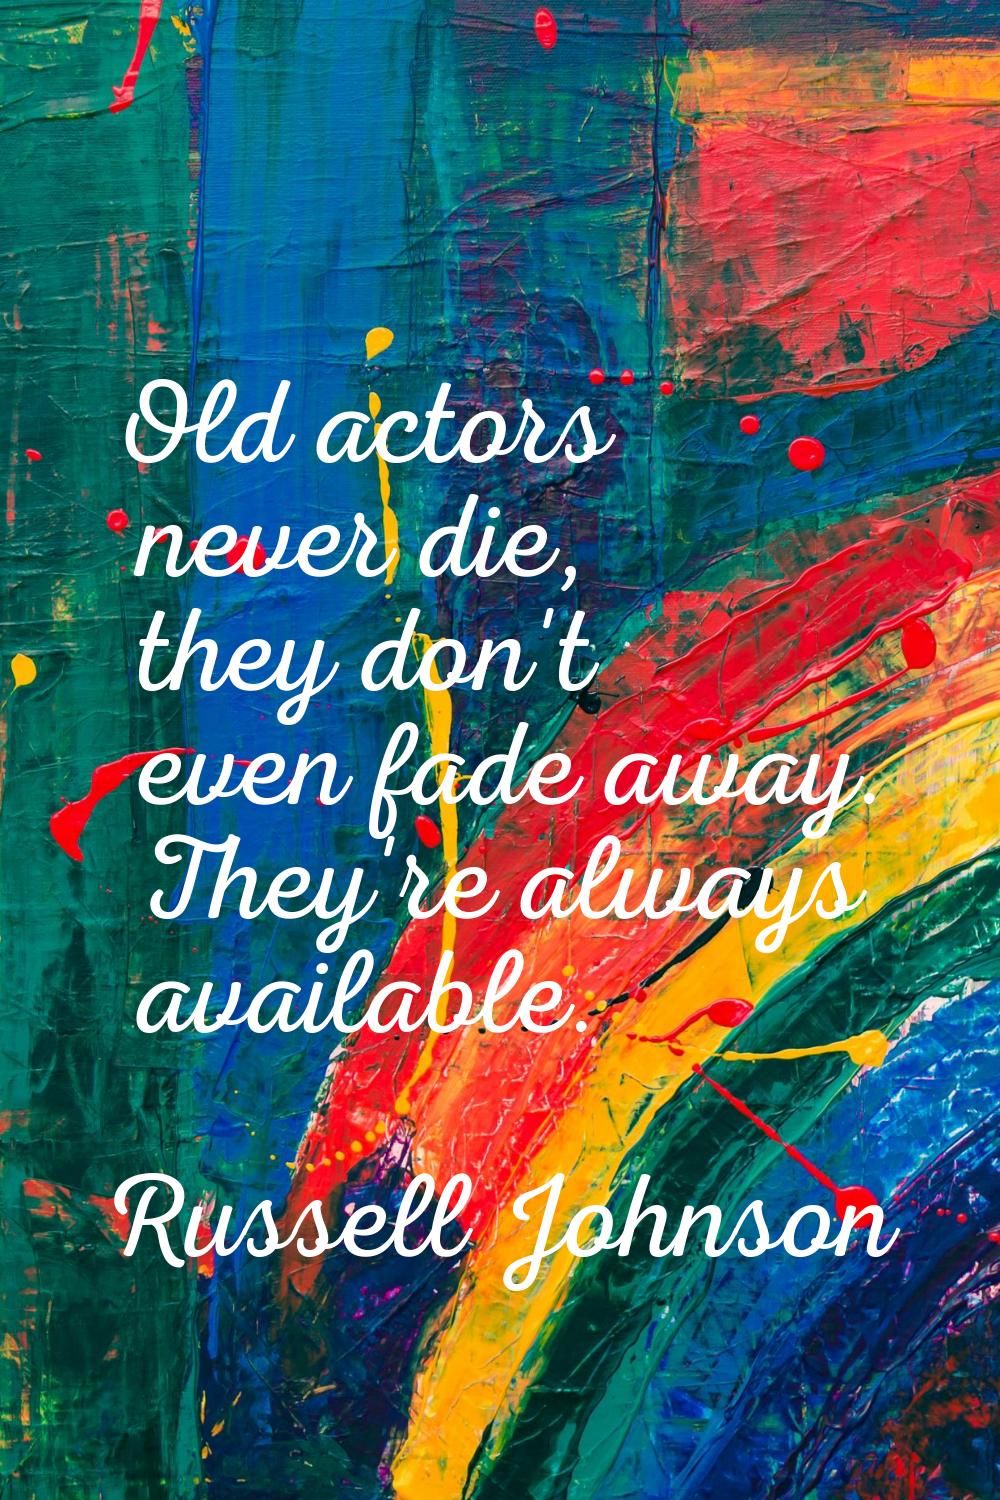 Old actors never die, they don't even fade away. They're always available.